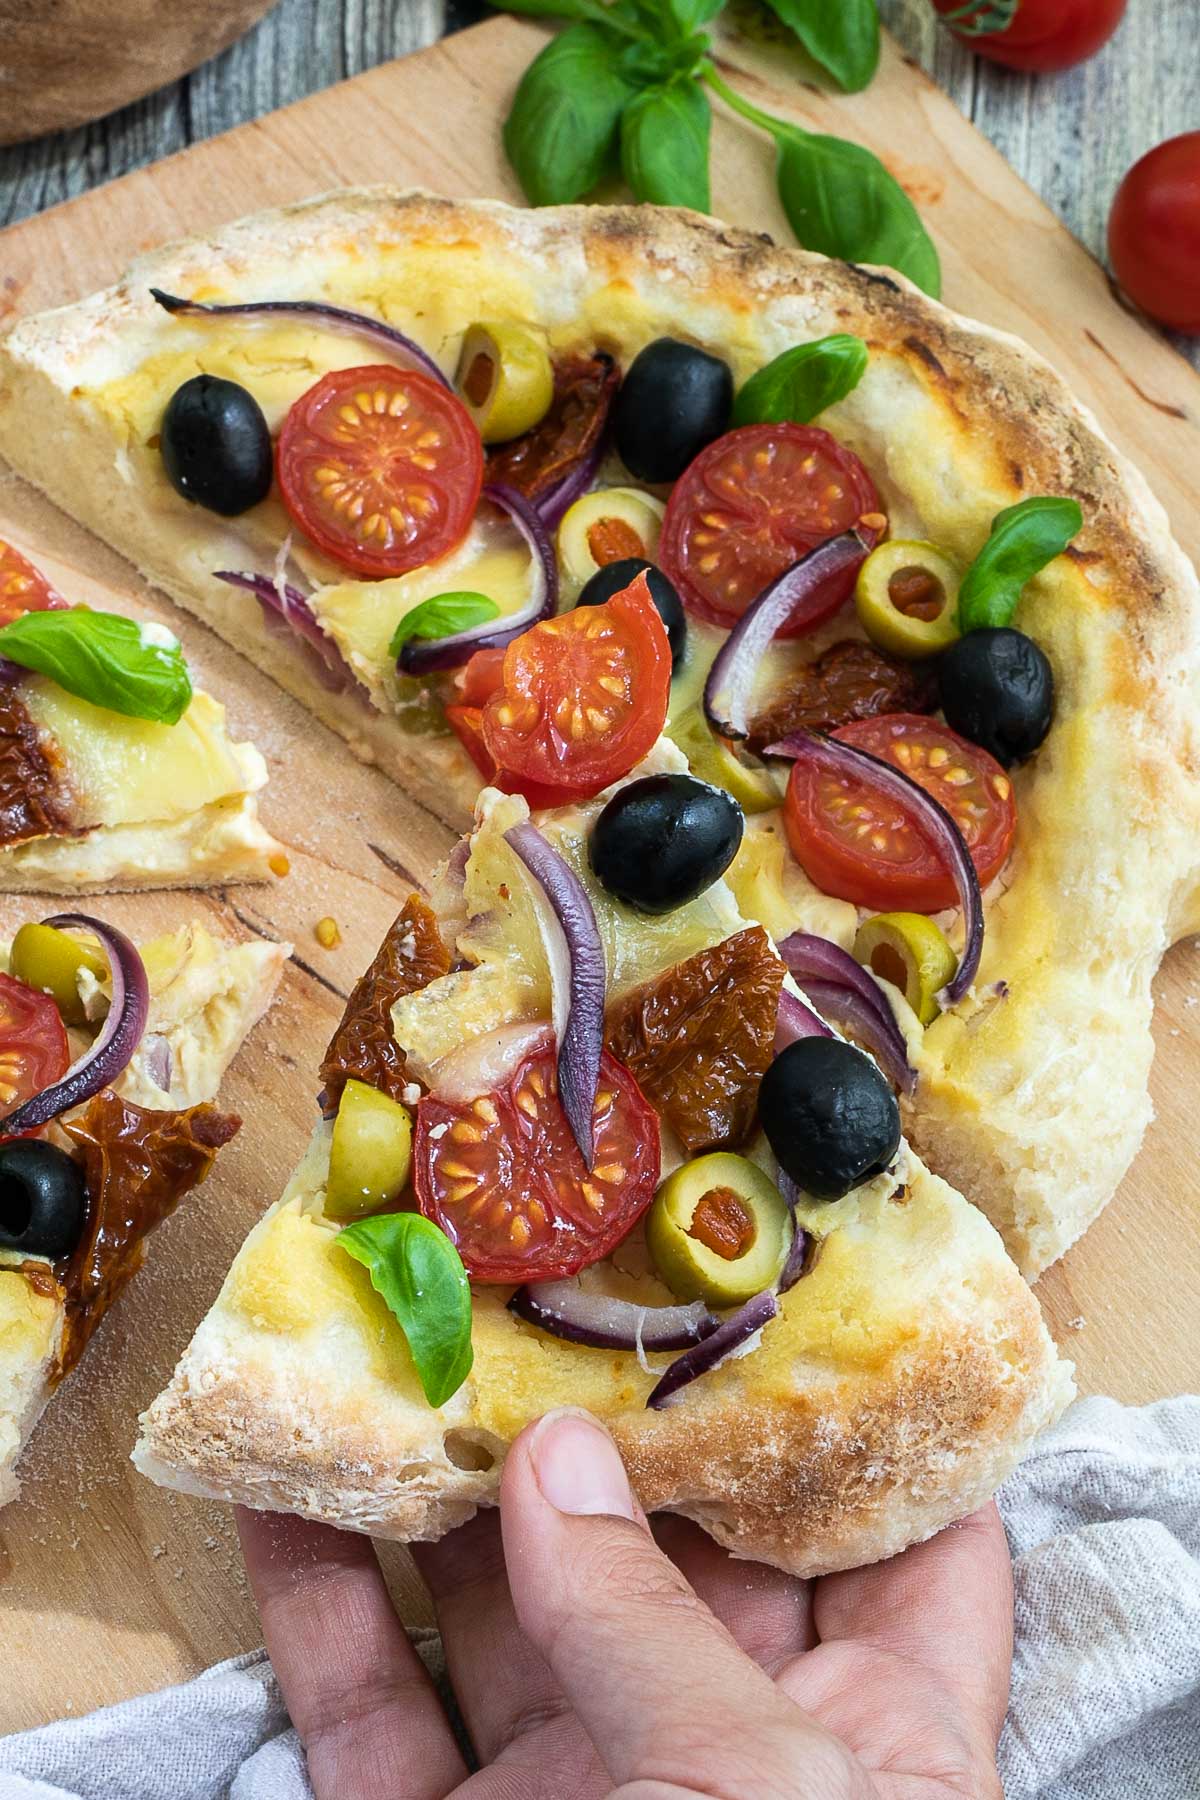 Sliced pizza on a wooden baker's peel topped with light brown hummus, cherry tomatoes, green and black olives, red onion slices, and fresh basil leaves. A hand is talking a slice.